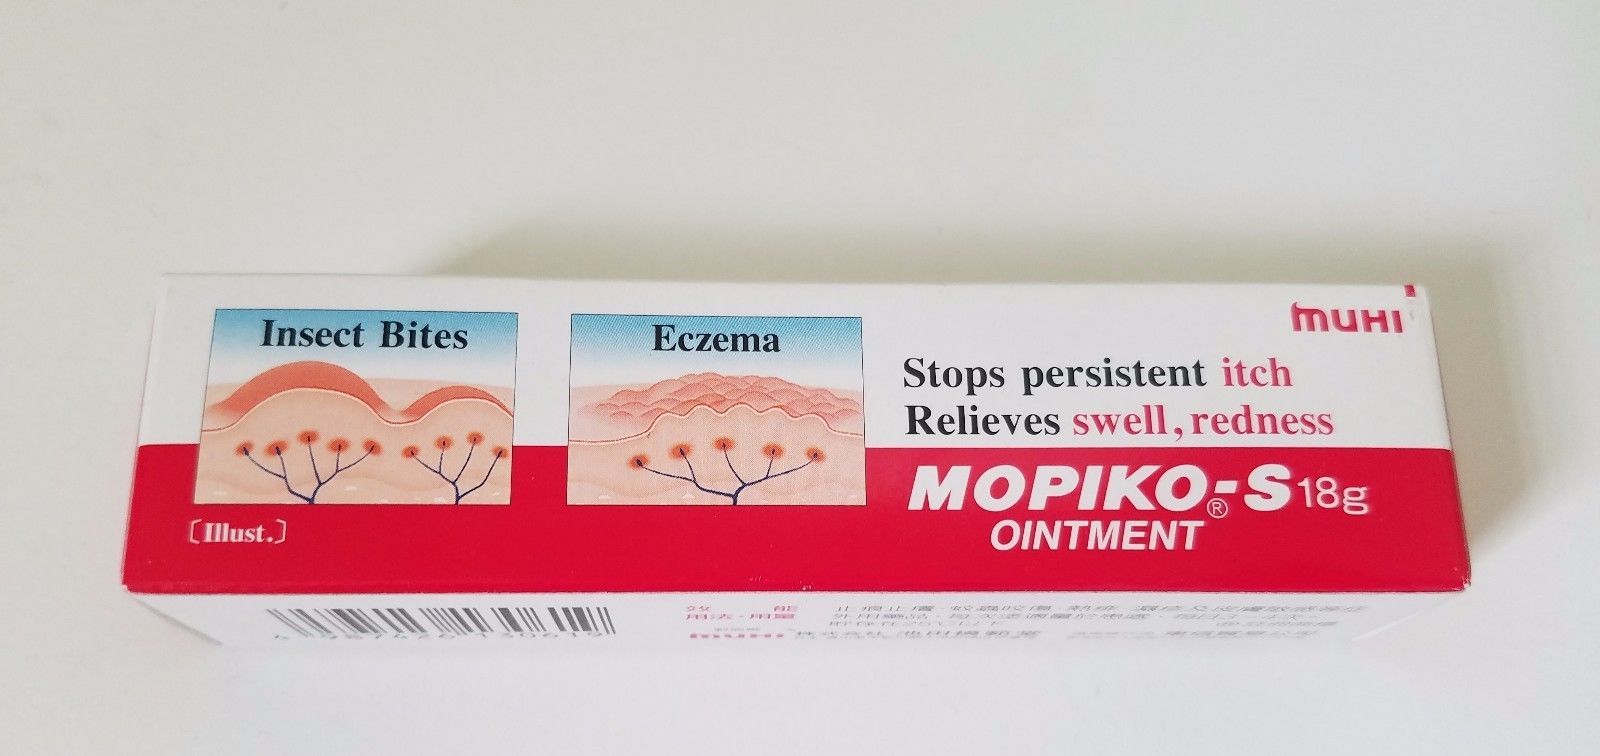 MOPIKO-S Ointment - Insect Bite and Eczema Relief - $12.34